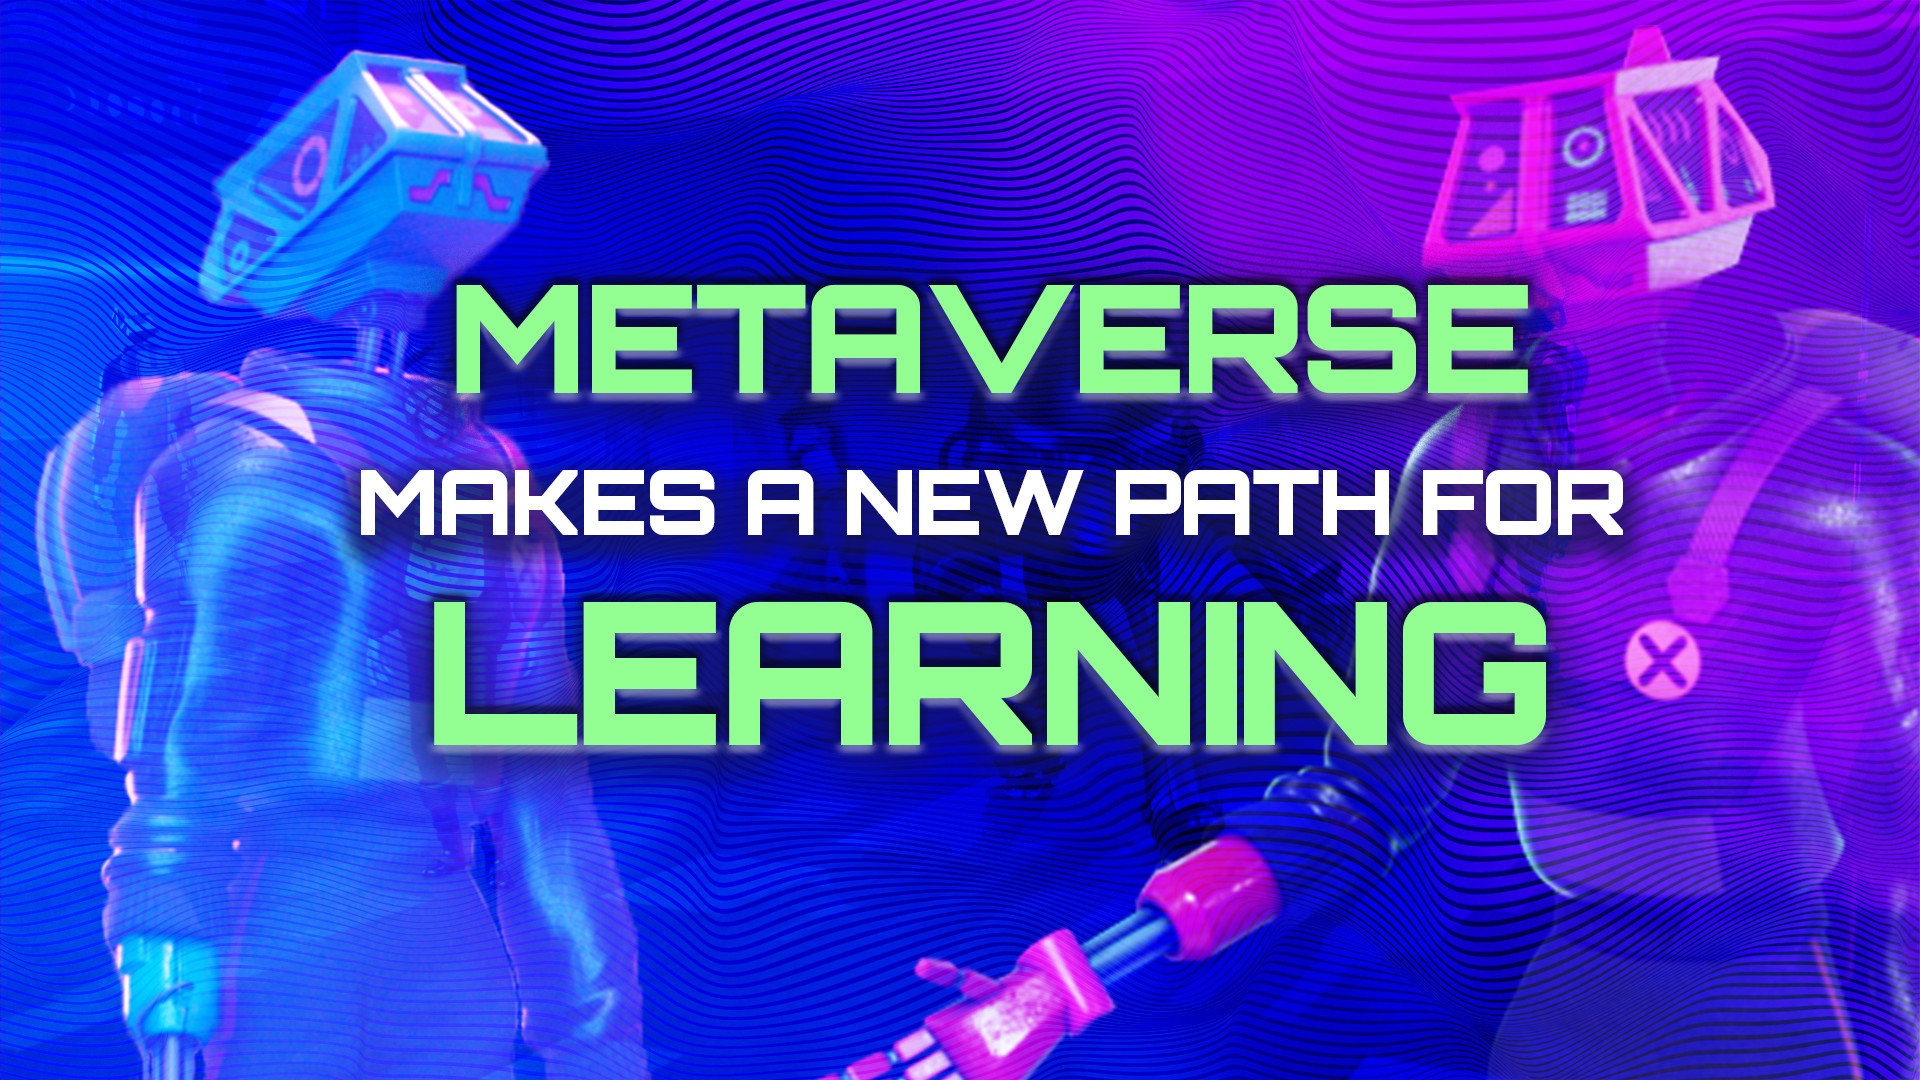 Metaverse Can Make A New Path For Learning article thumbnail